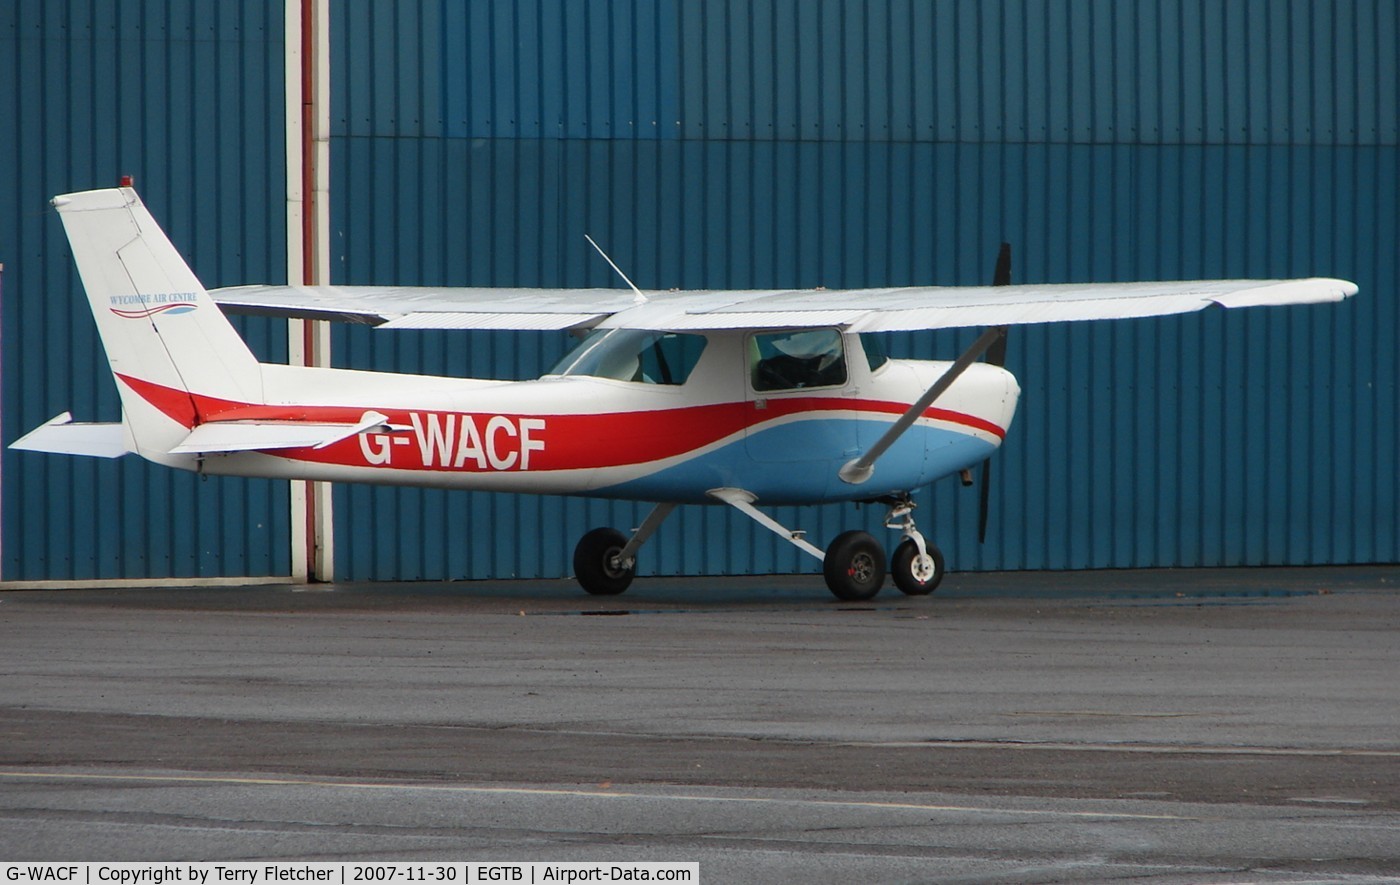 G-WACF, 1980 Cessna 152 C/N 152-84852, C152 at Wycombe Air Park - Booker Airfield